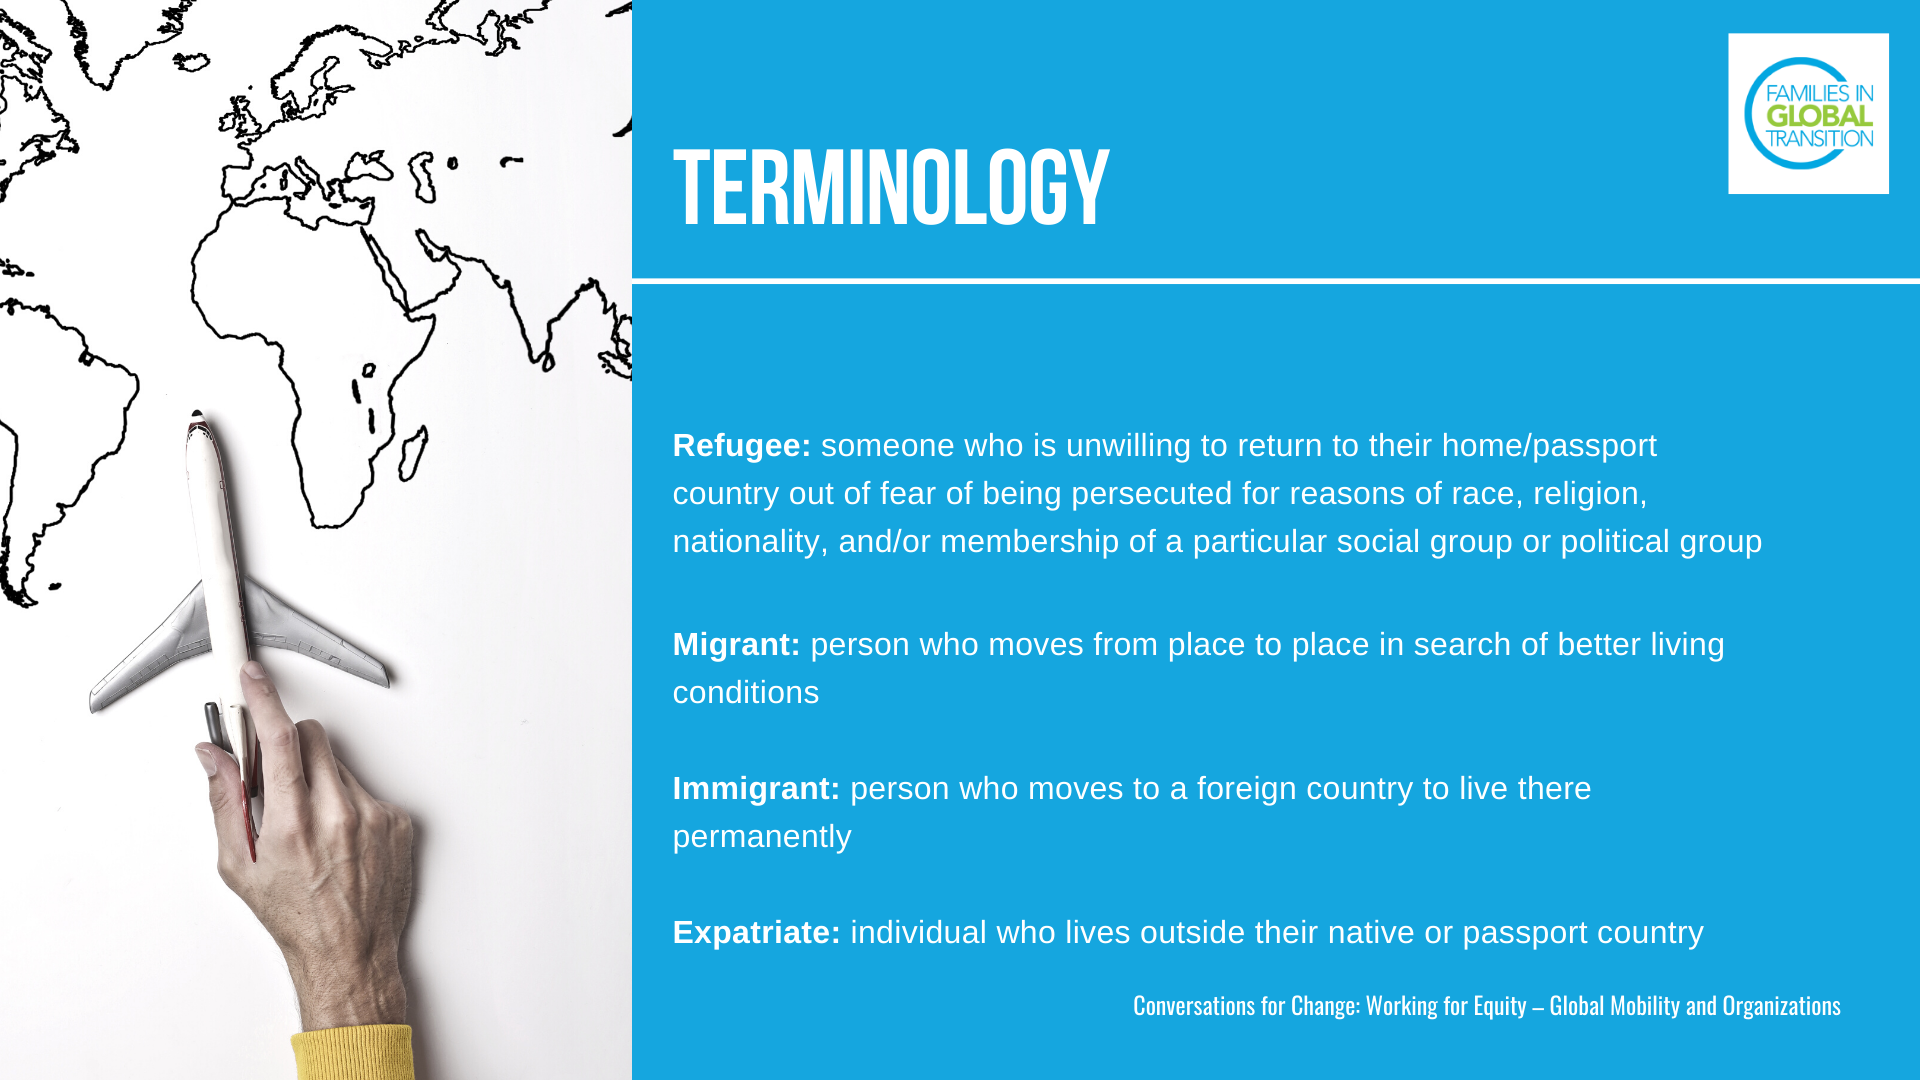 Terminology: definitions of a Refugee: someone who is unwilling to return to their home/passport country out of fear of being persecuted for reasons of race, religion, nationality, and/or membership of a particular social group or political group. Migrant: person who moves from place to place in search of better living conditions. Immigrant: person who moves to a foreign country to live there permanently. Expatriate: individual who lives outside their native or passport country